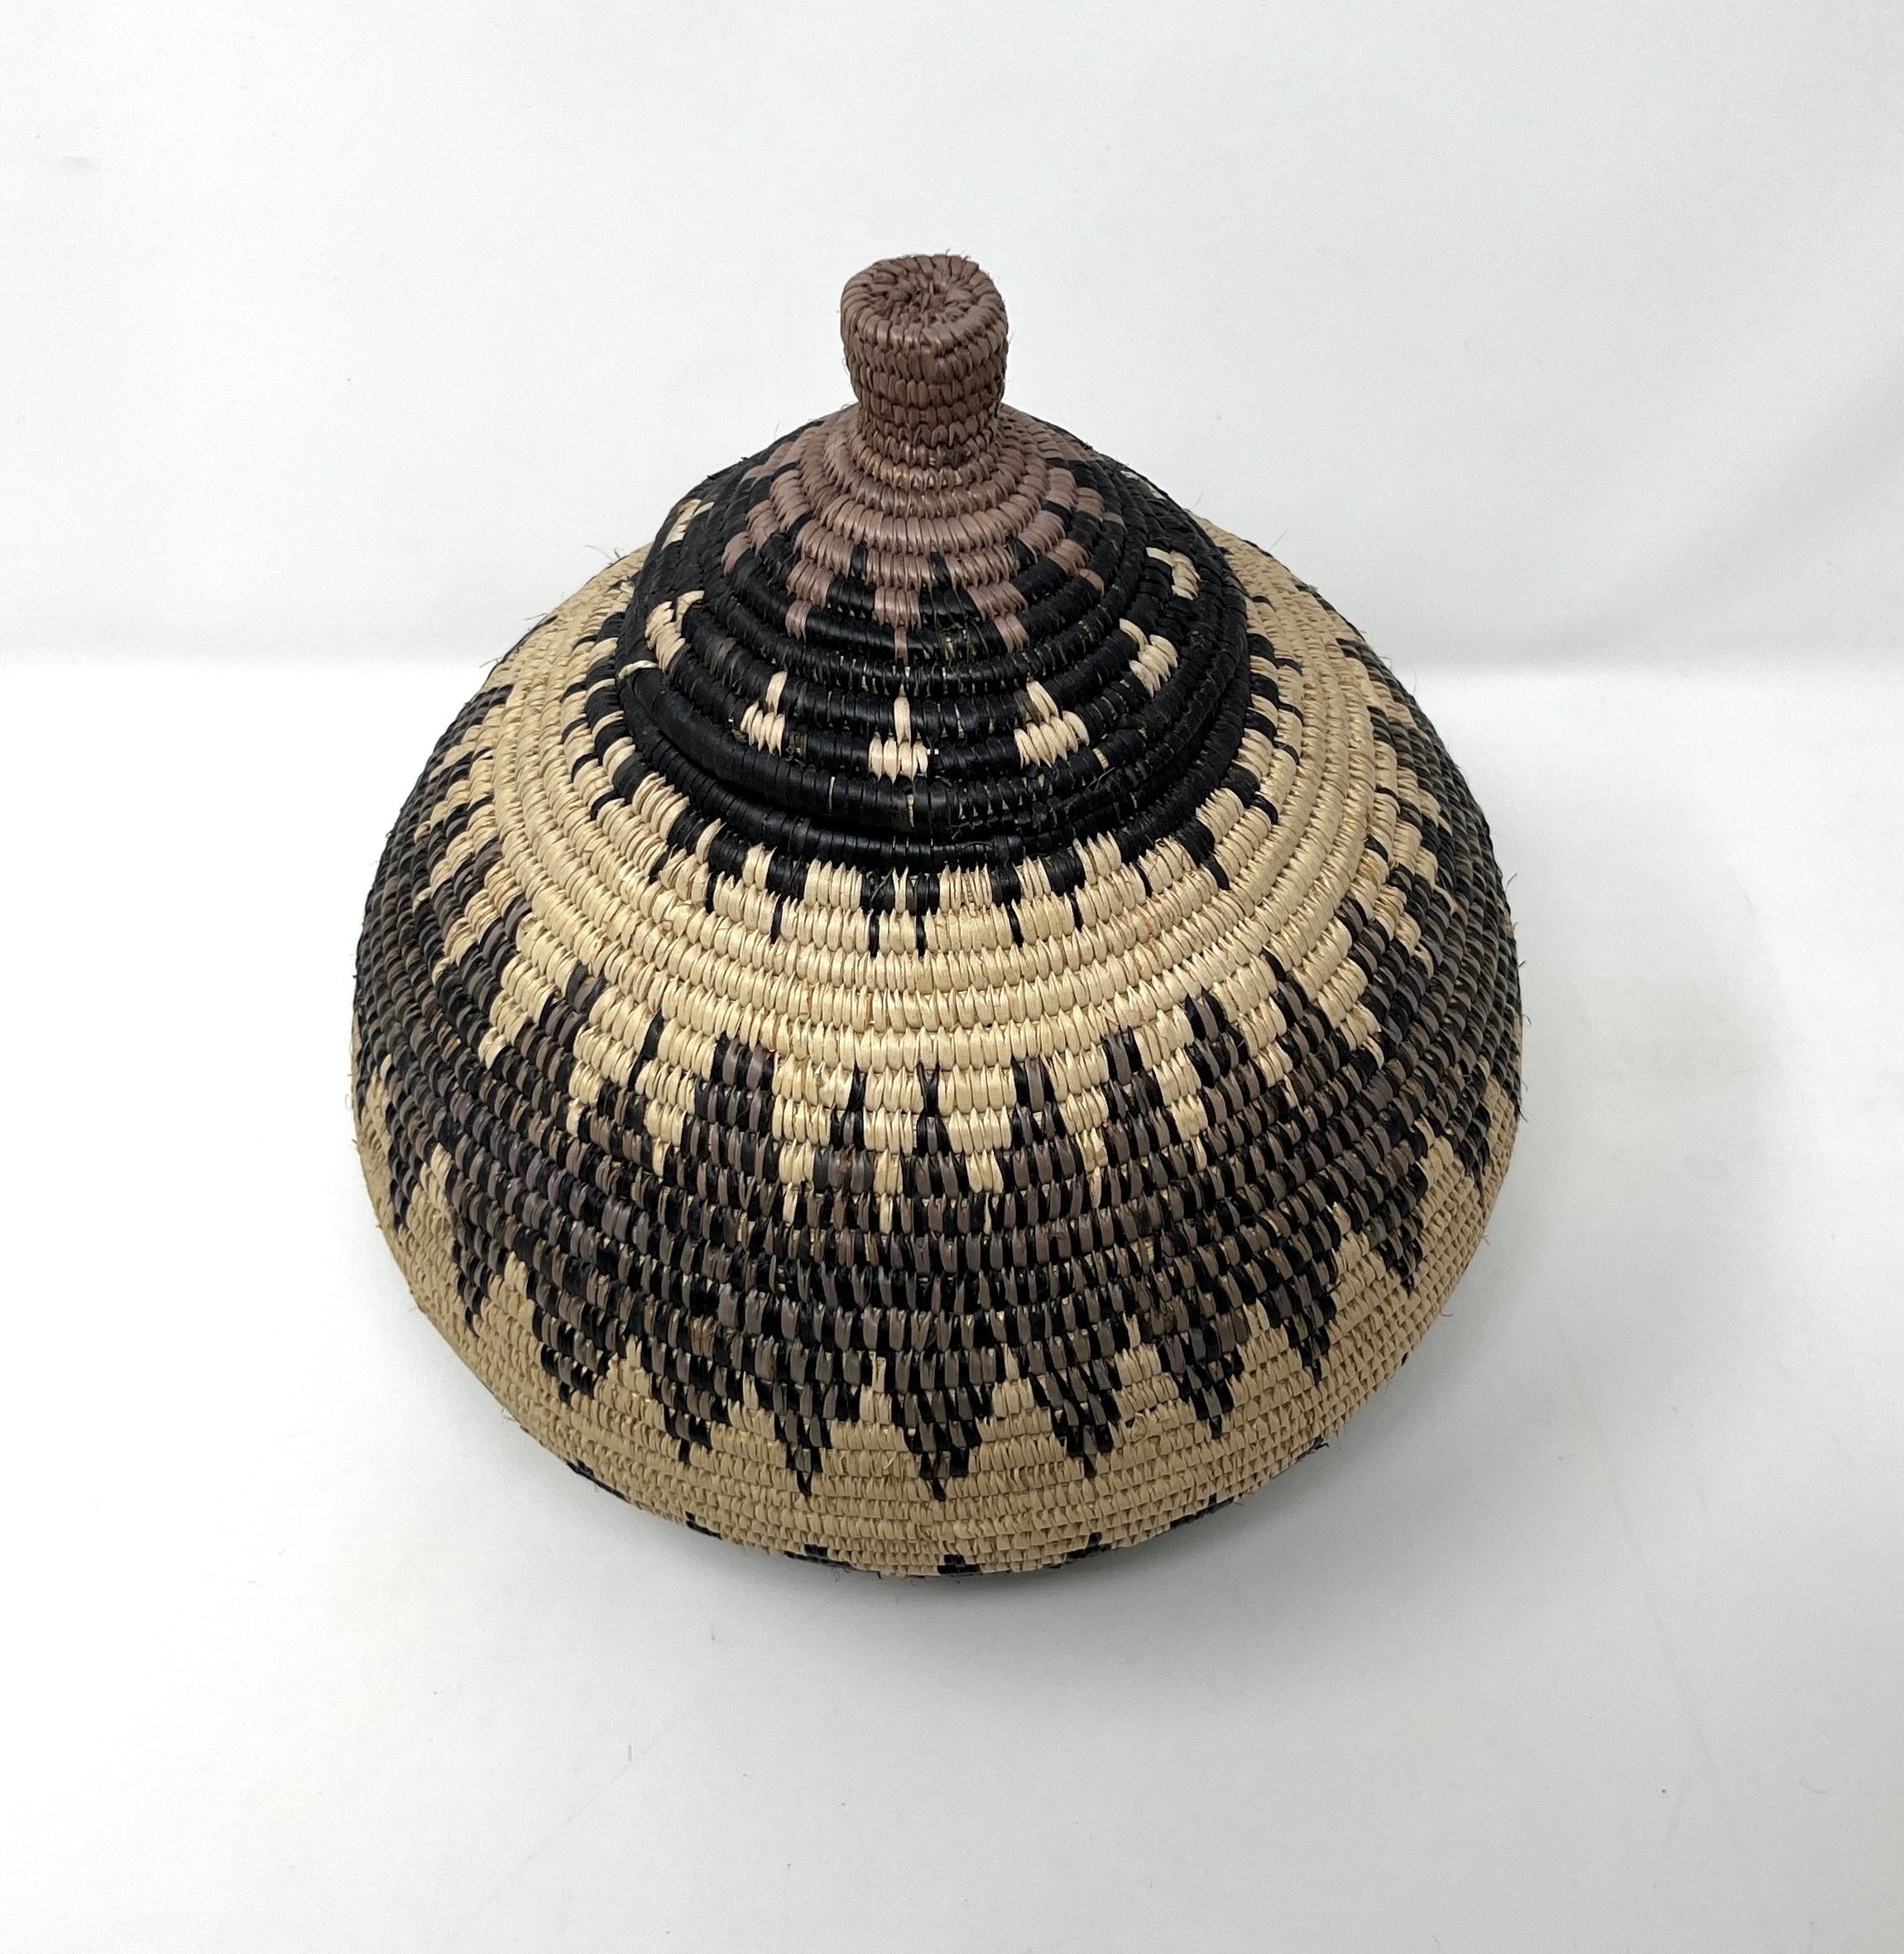 This basket is made of natural elements and traditional fibers sourced from nature and assembled together by skilled weavers, using the extract of dyes obtained from natural sources like roots, barks, fruit and berries, and leaves. Black, tan and